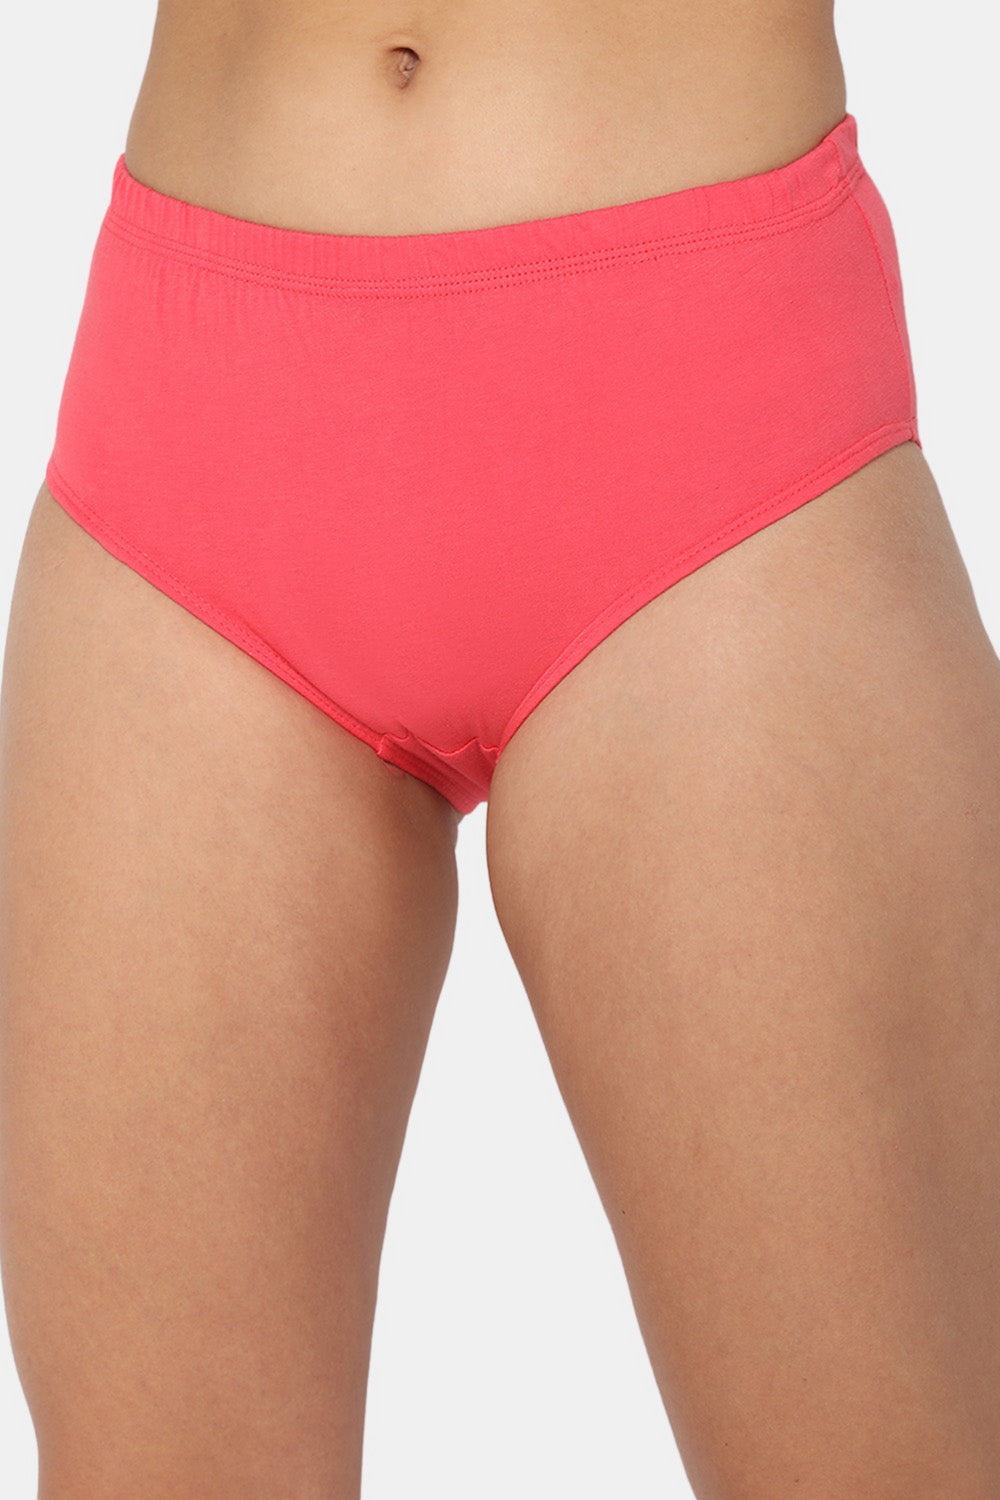 Daily Wear Cotton Panty Pack of 3, Lingerie, Panties Free Delivery